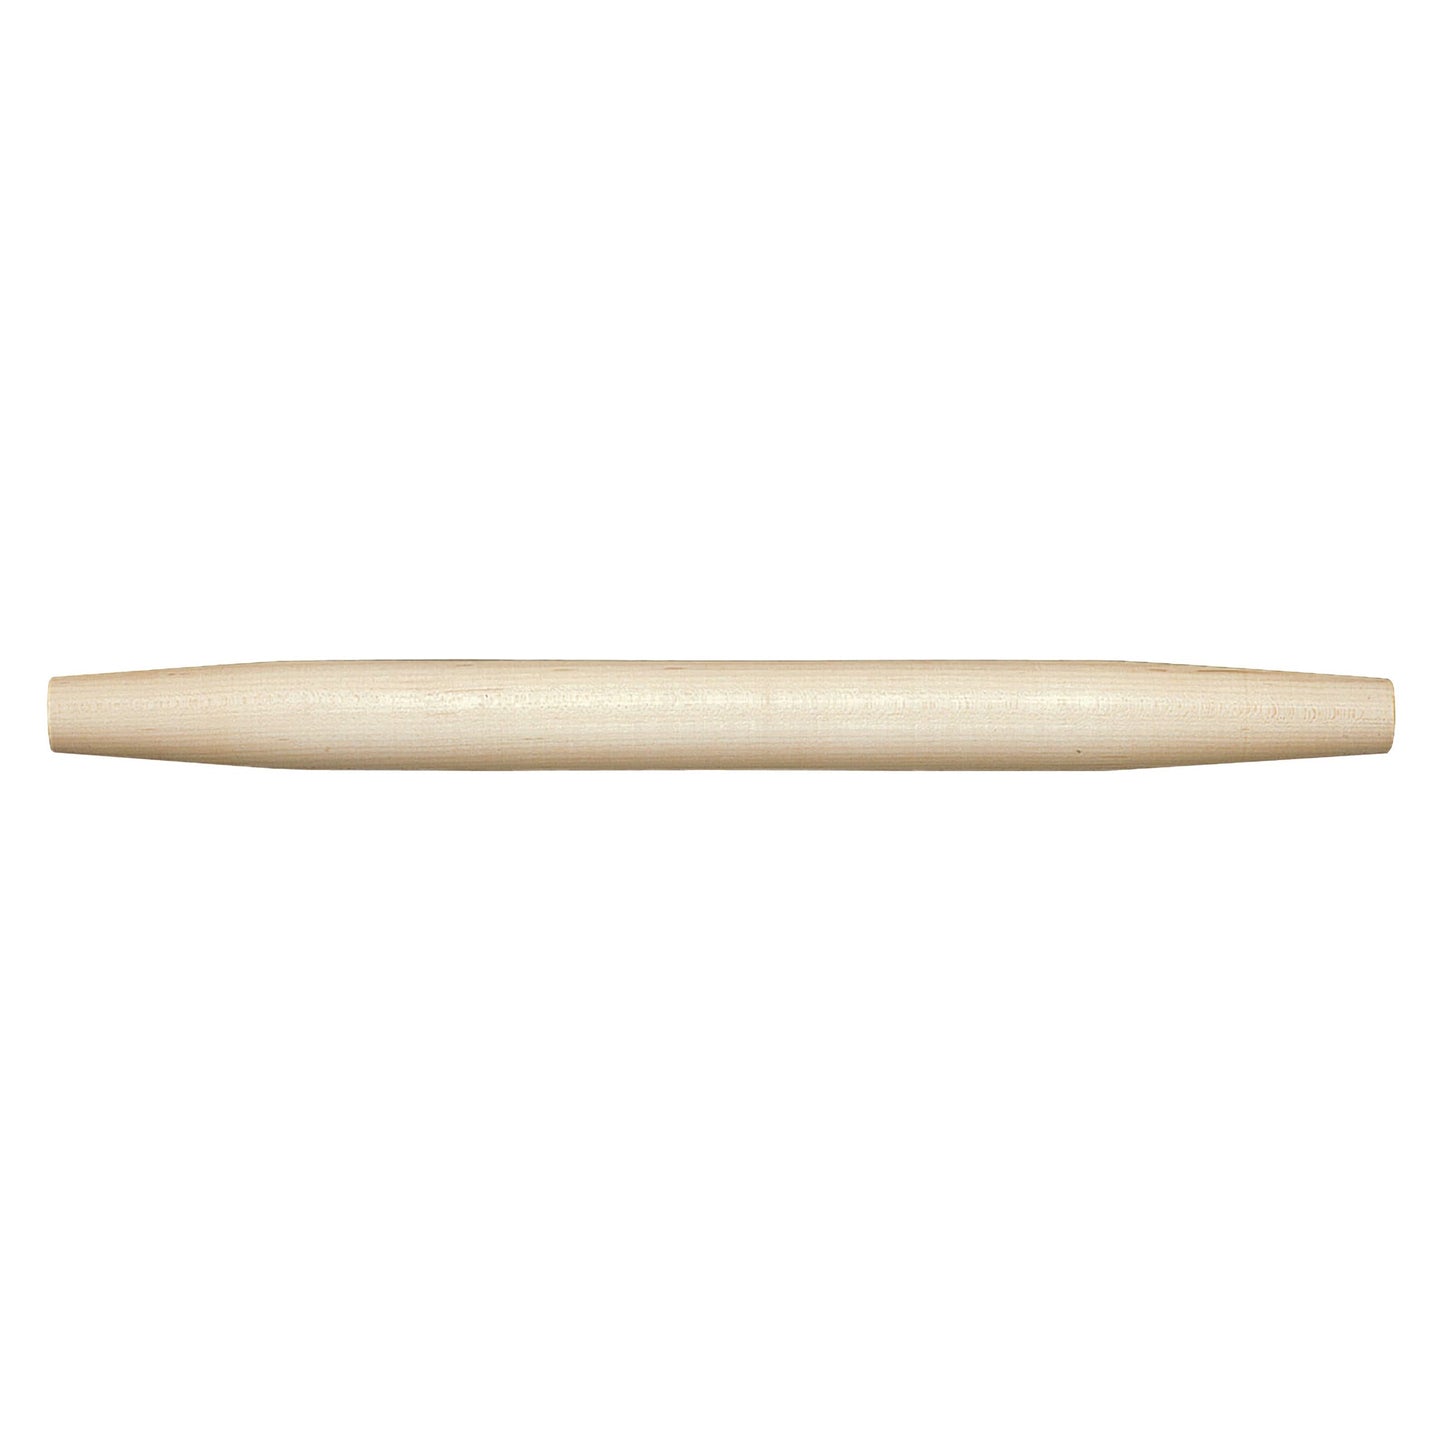 Straight Wooden Rolling Pin on a White Background